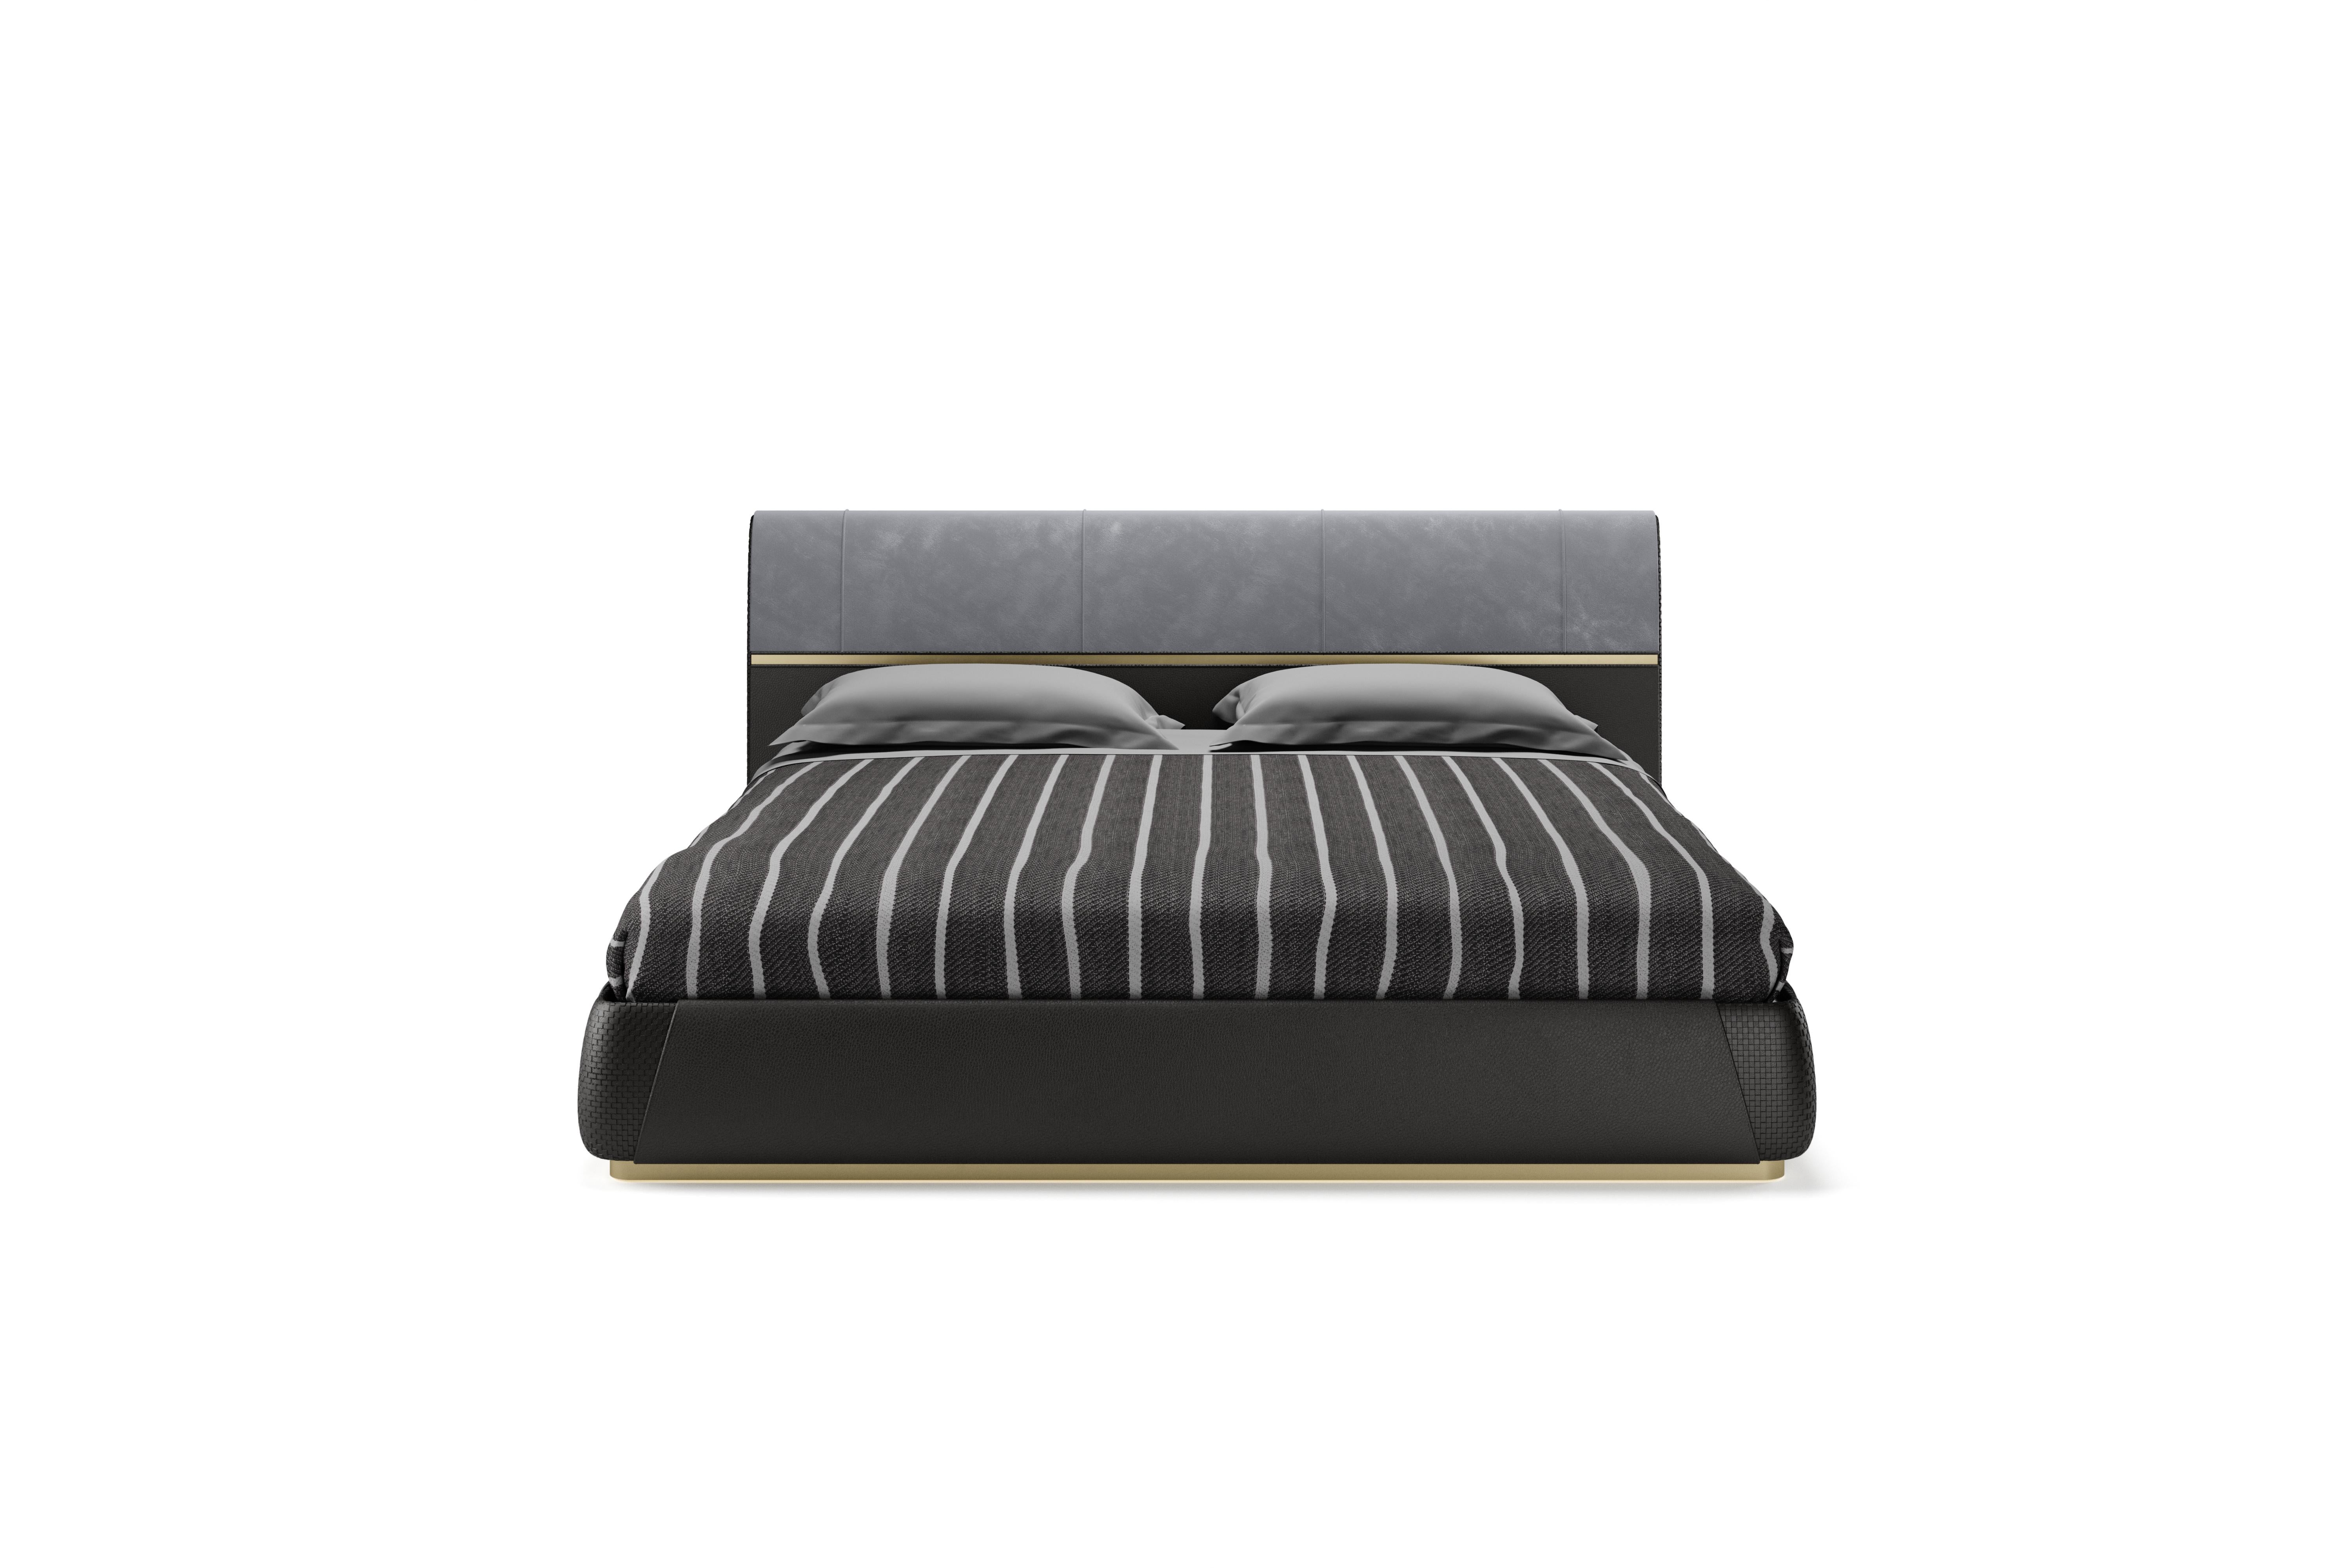 Dorian, guest bed in velvet and leather structure with metal gold frame dividing the materials. The edges details are made in crossed leather.

Dorian is available in foreign certifications.

Dorian is part of the 